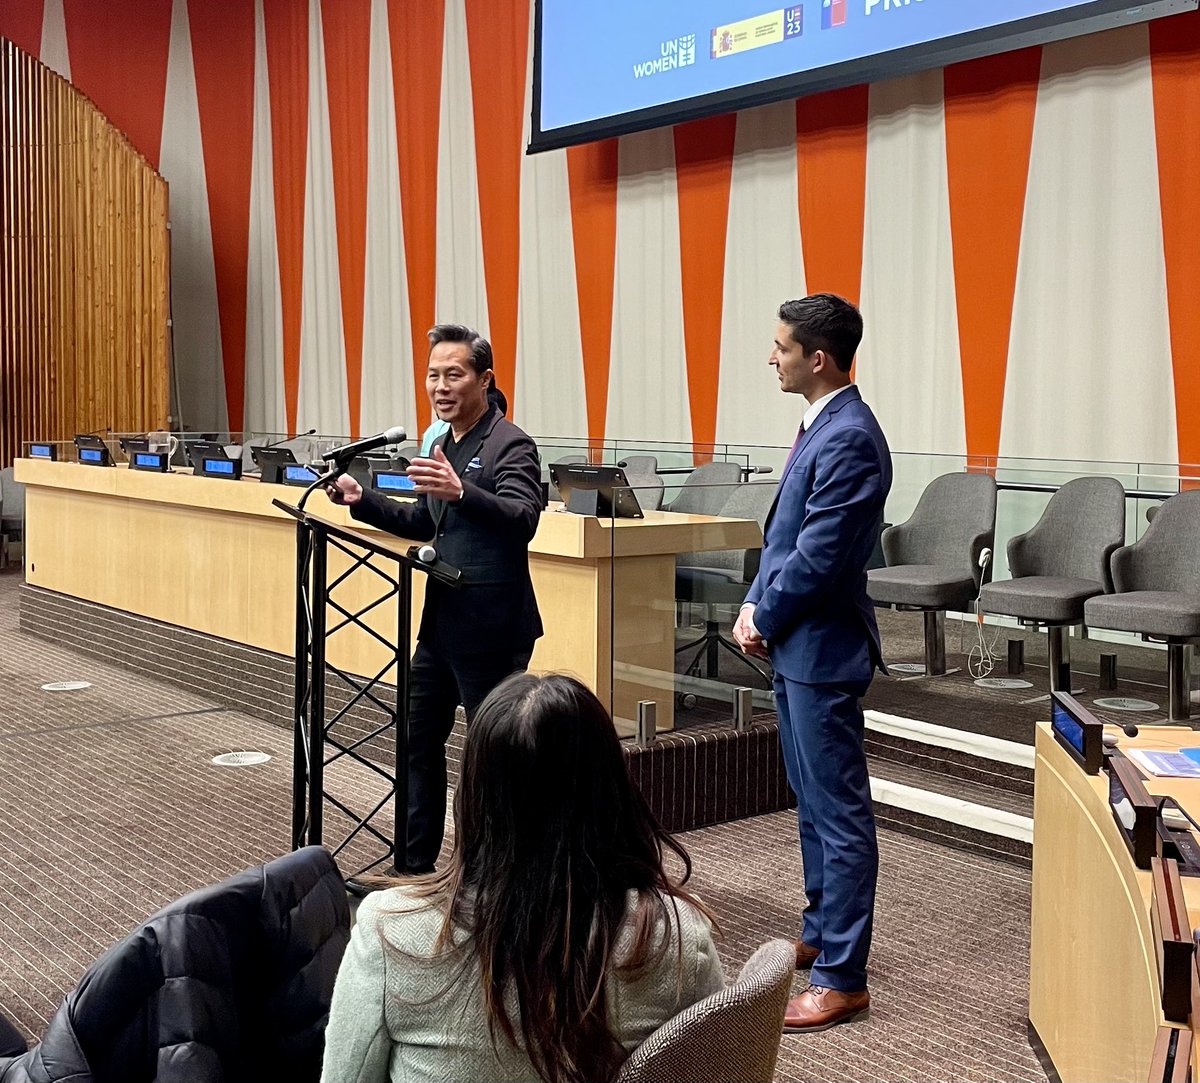 The powerful documentary “Unconditional” was screened at the UN tonight. The film profiles three families struggling with caregiving and mental health issues. Great to catch up with friend and the film’s director @richardlui.